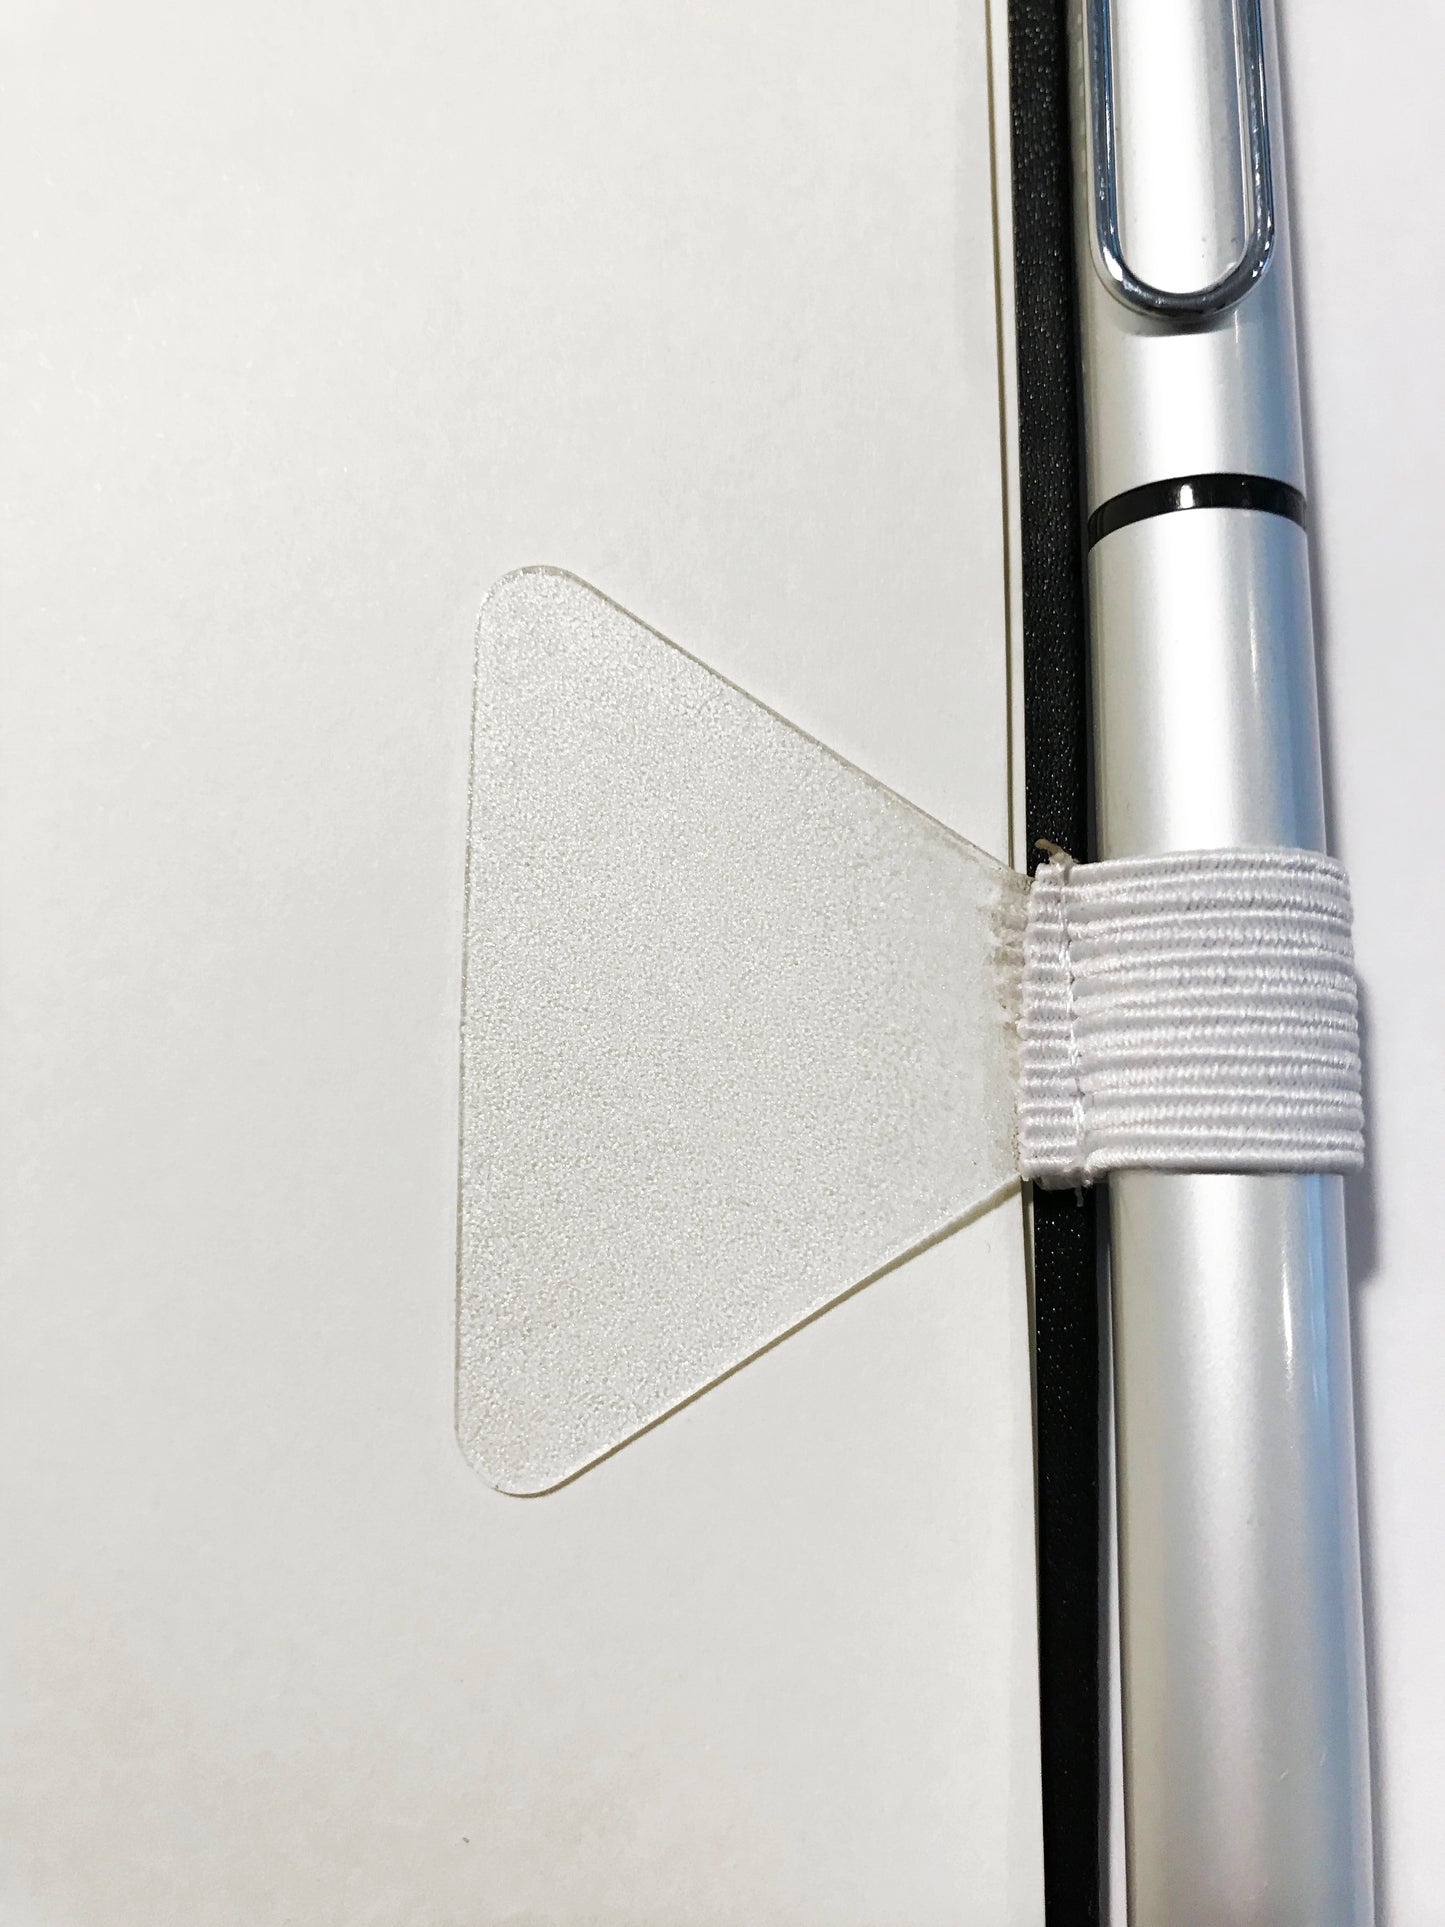 White Self-adhesive Pen Loop - Elastic White Pen Holder by Gobrecht & Ulrich attached to back of notebook